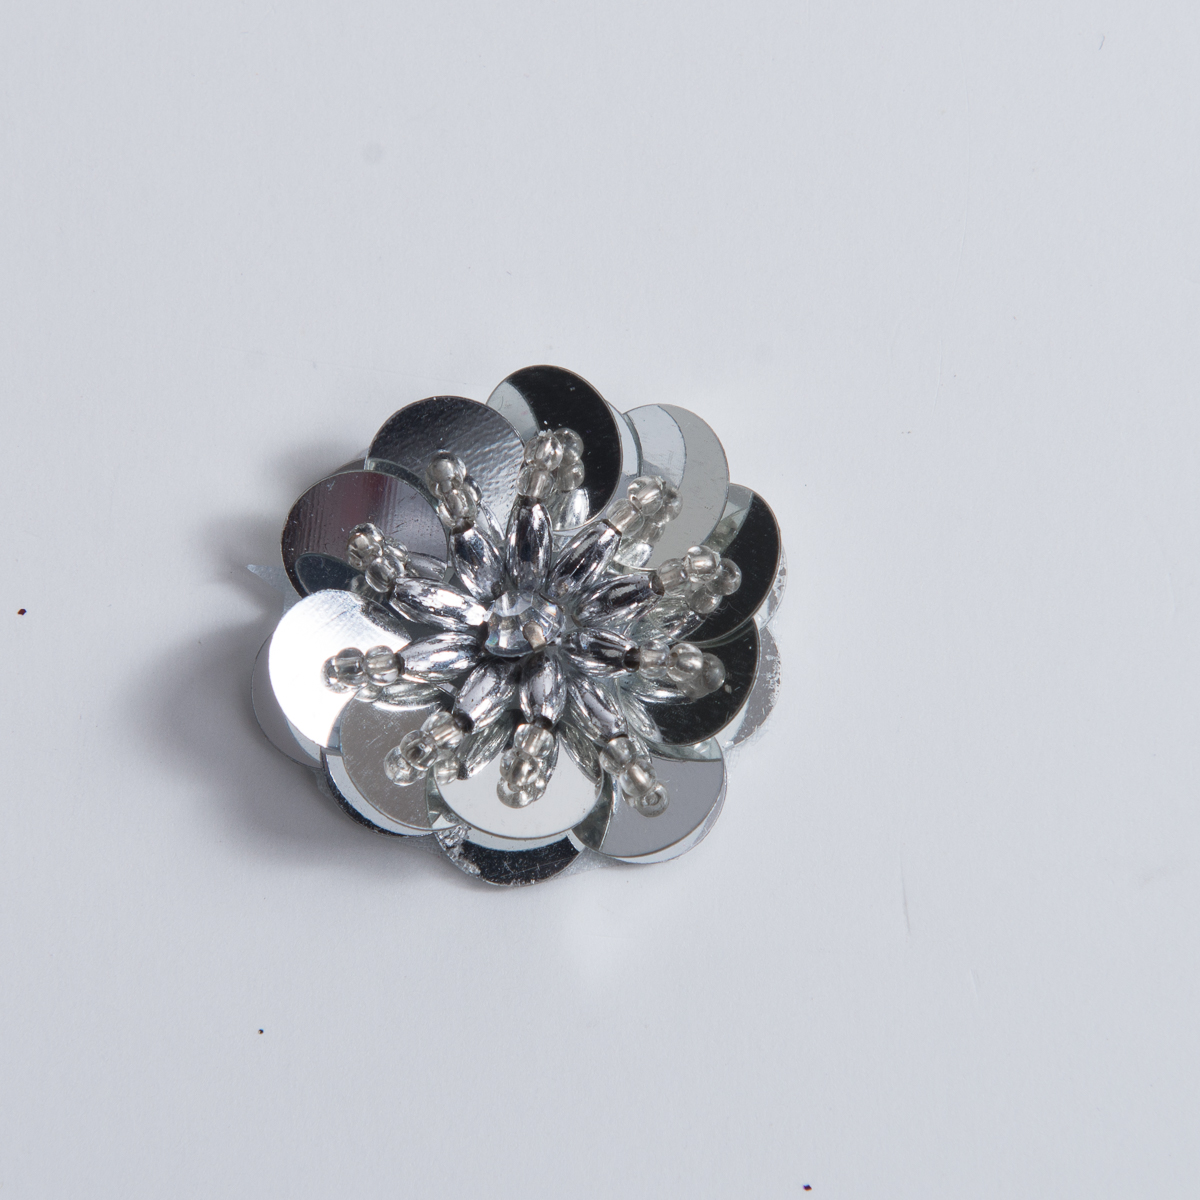 6ct Sequin Flower Charms by hildie & jo